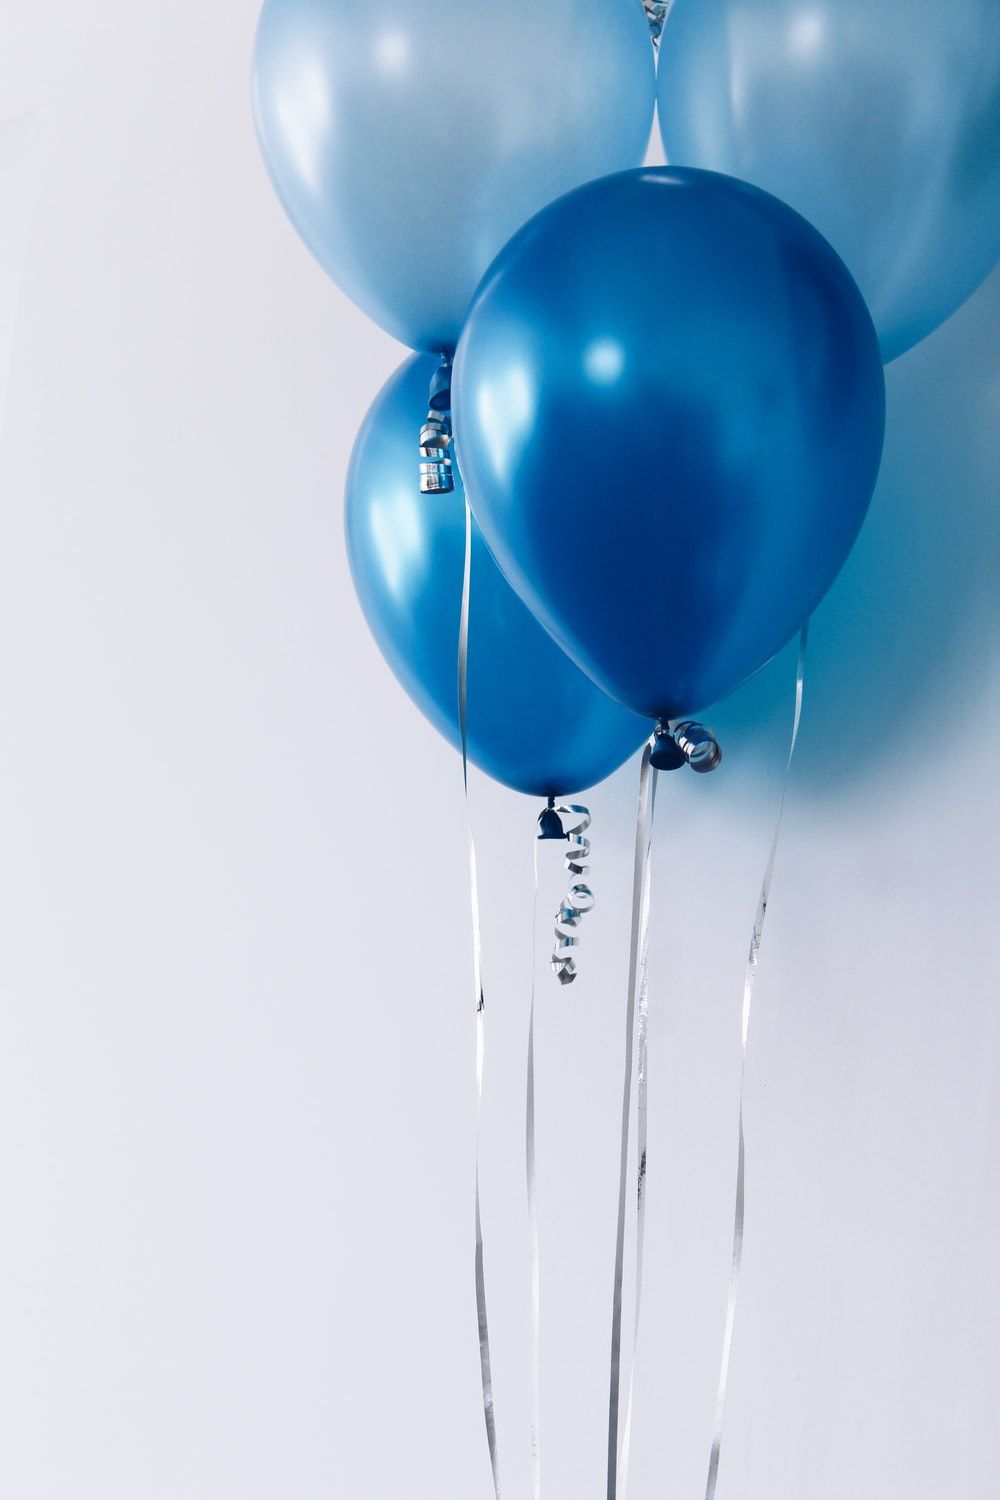 Balloon Image. Download Free Picture